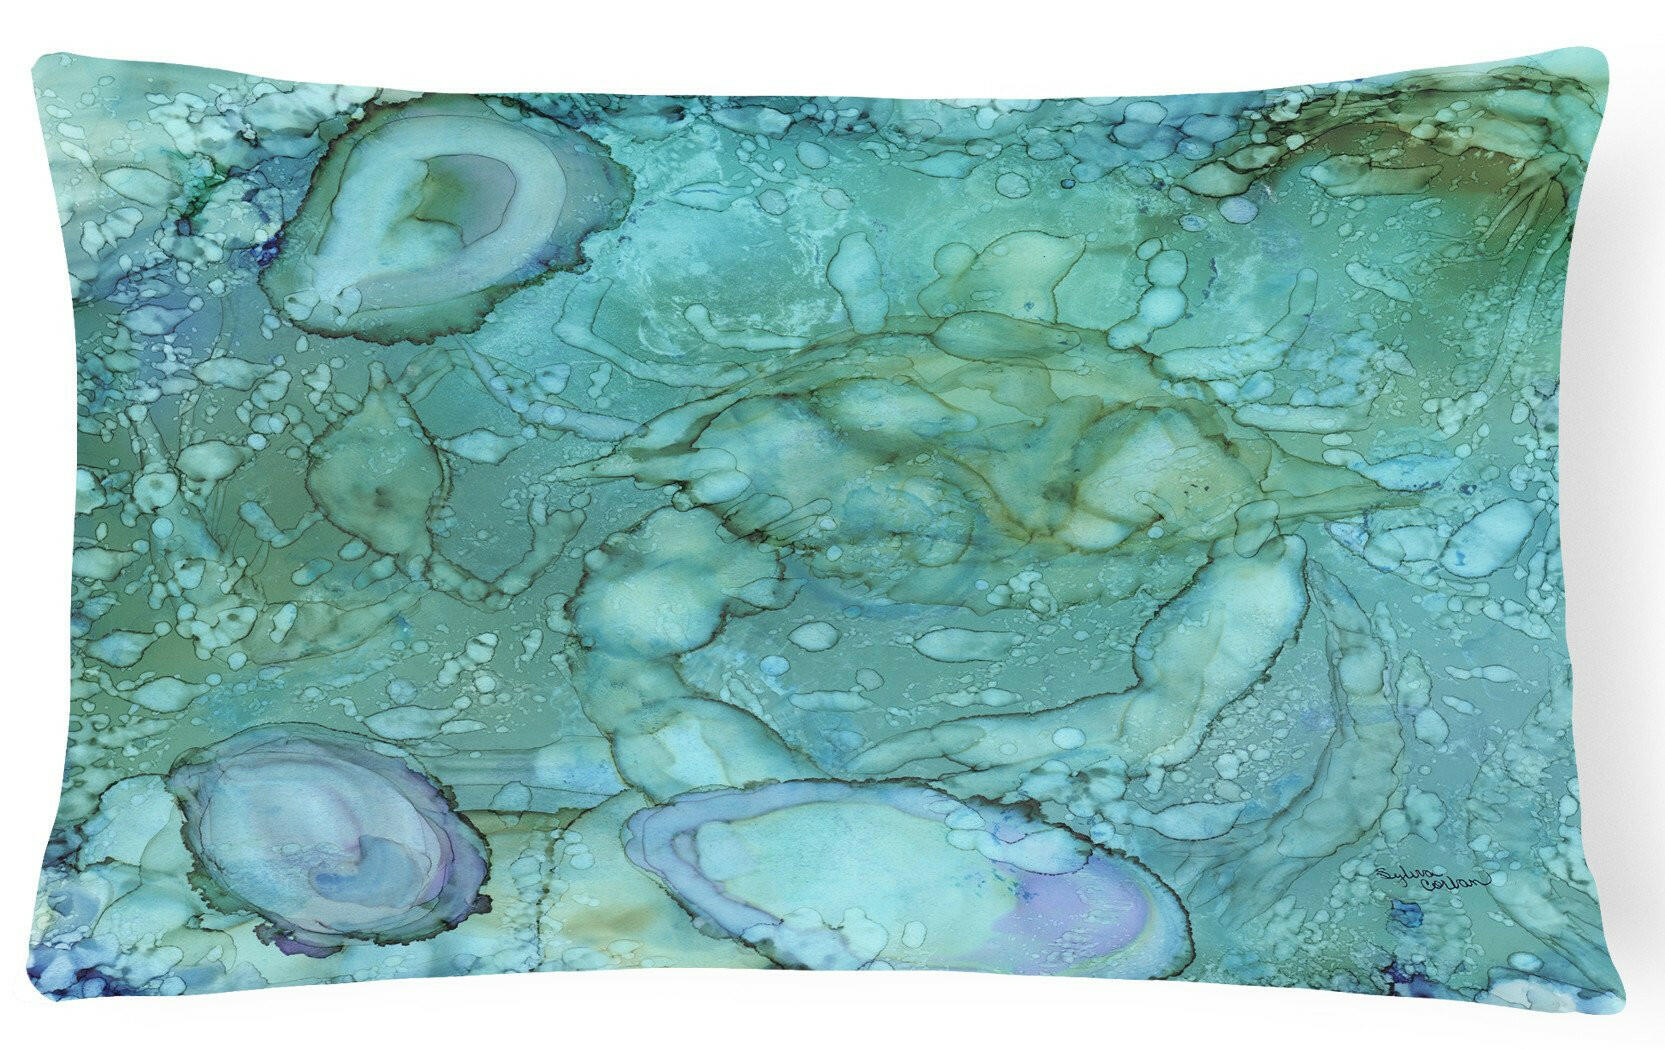 Abstract Crabs and Oysters Fabric Decorative Pillow 8963PW1216 by Caroline's Treasures